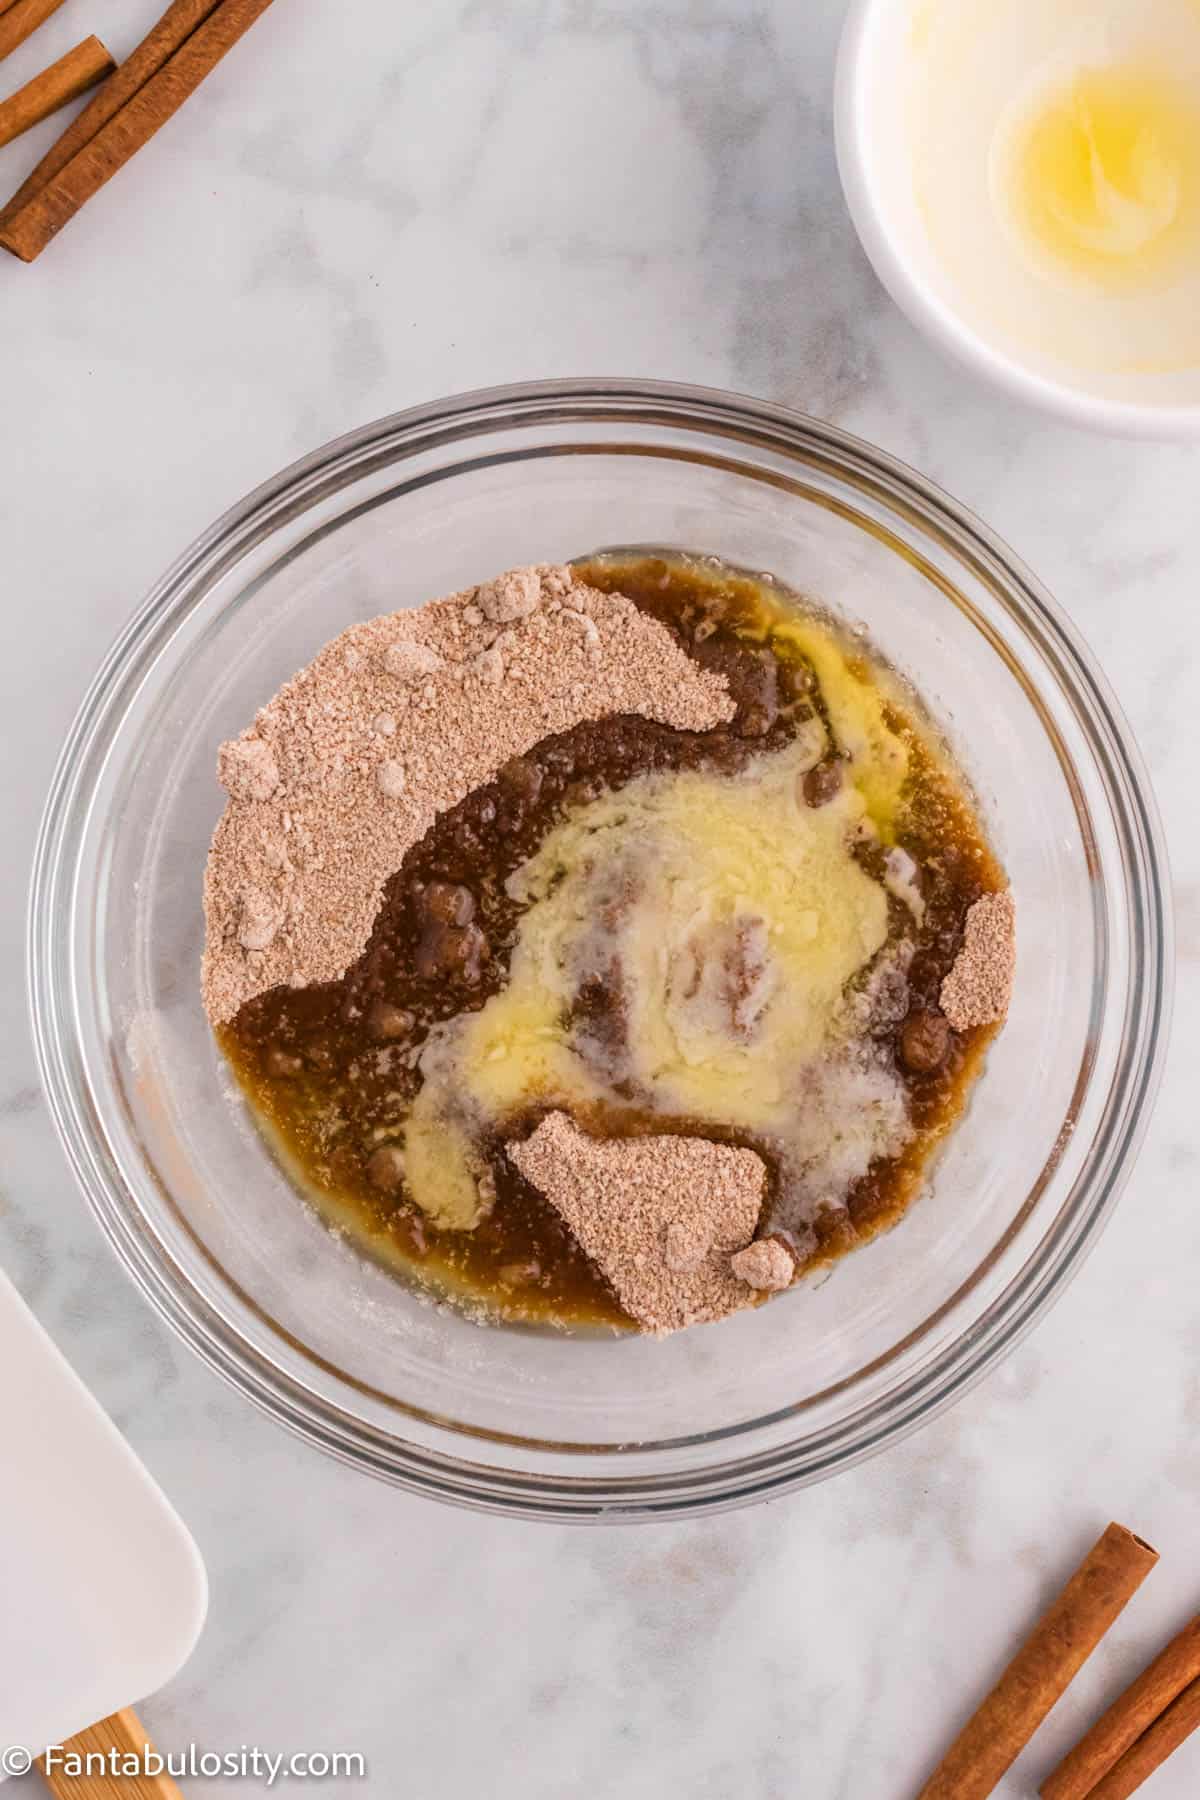 A bowl displays melted butter, brown sugar, cinnamon and flour - these ingredients will be combined to make the cinnamon crumb topping for Cinnamon Coffee Cake